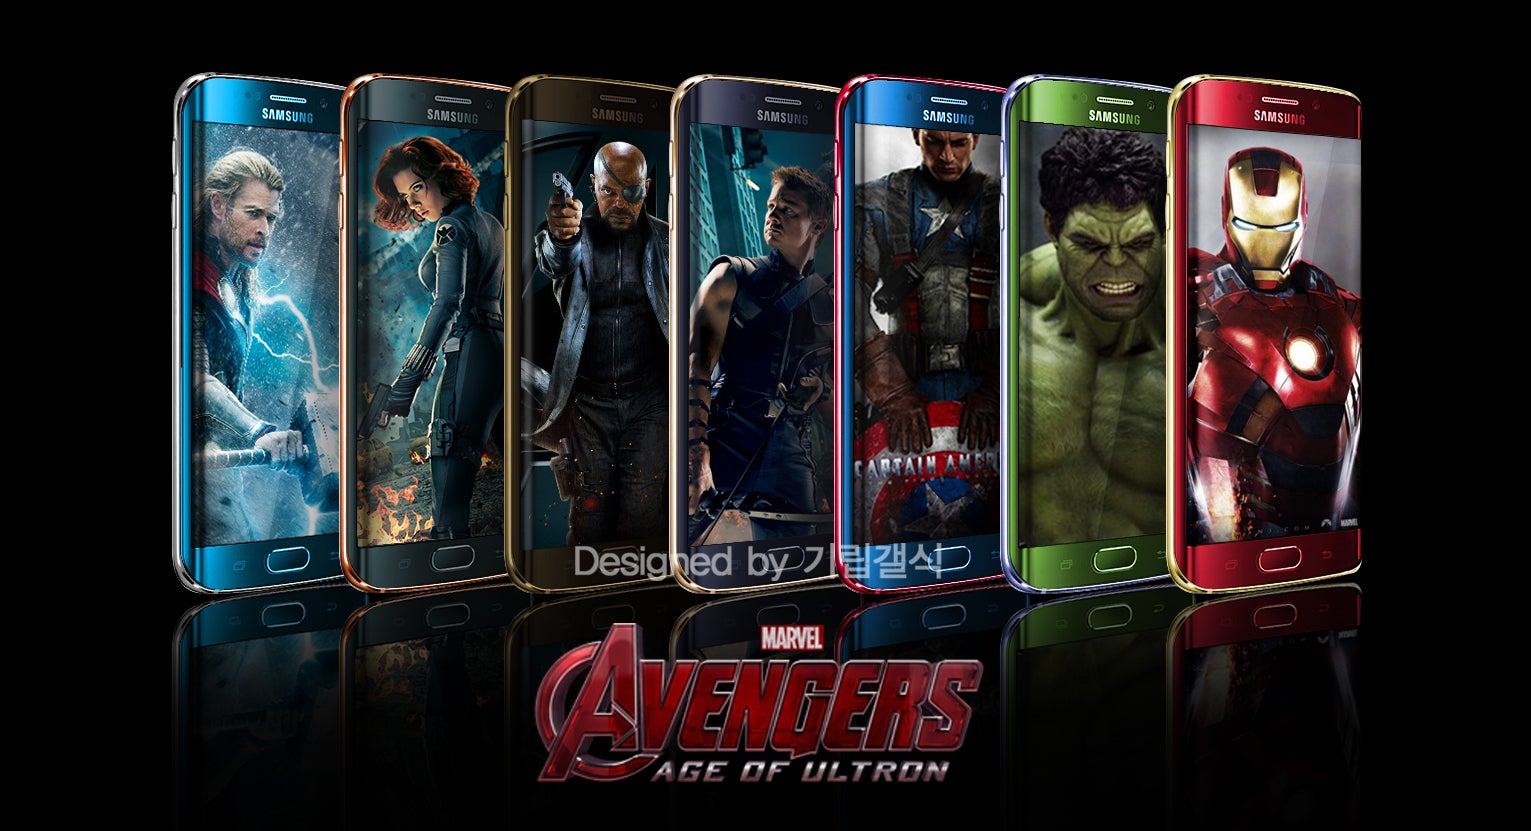 Samsung considering whether to build limited edition Avengers-themed Samsung Galaxy S6 edge variants